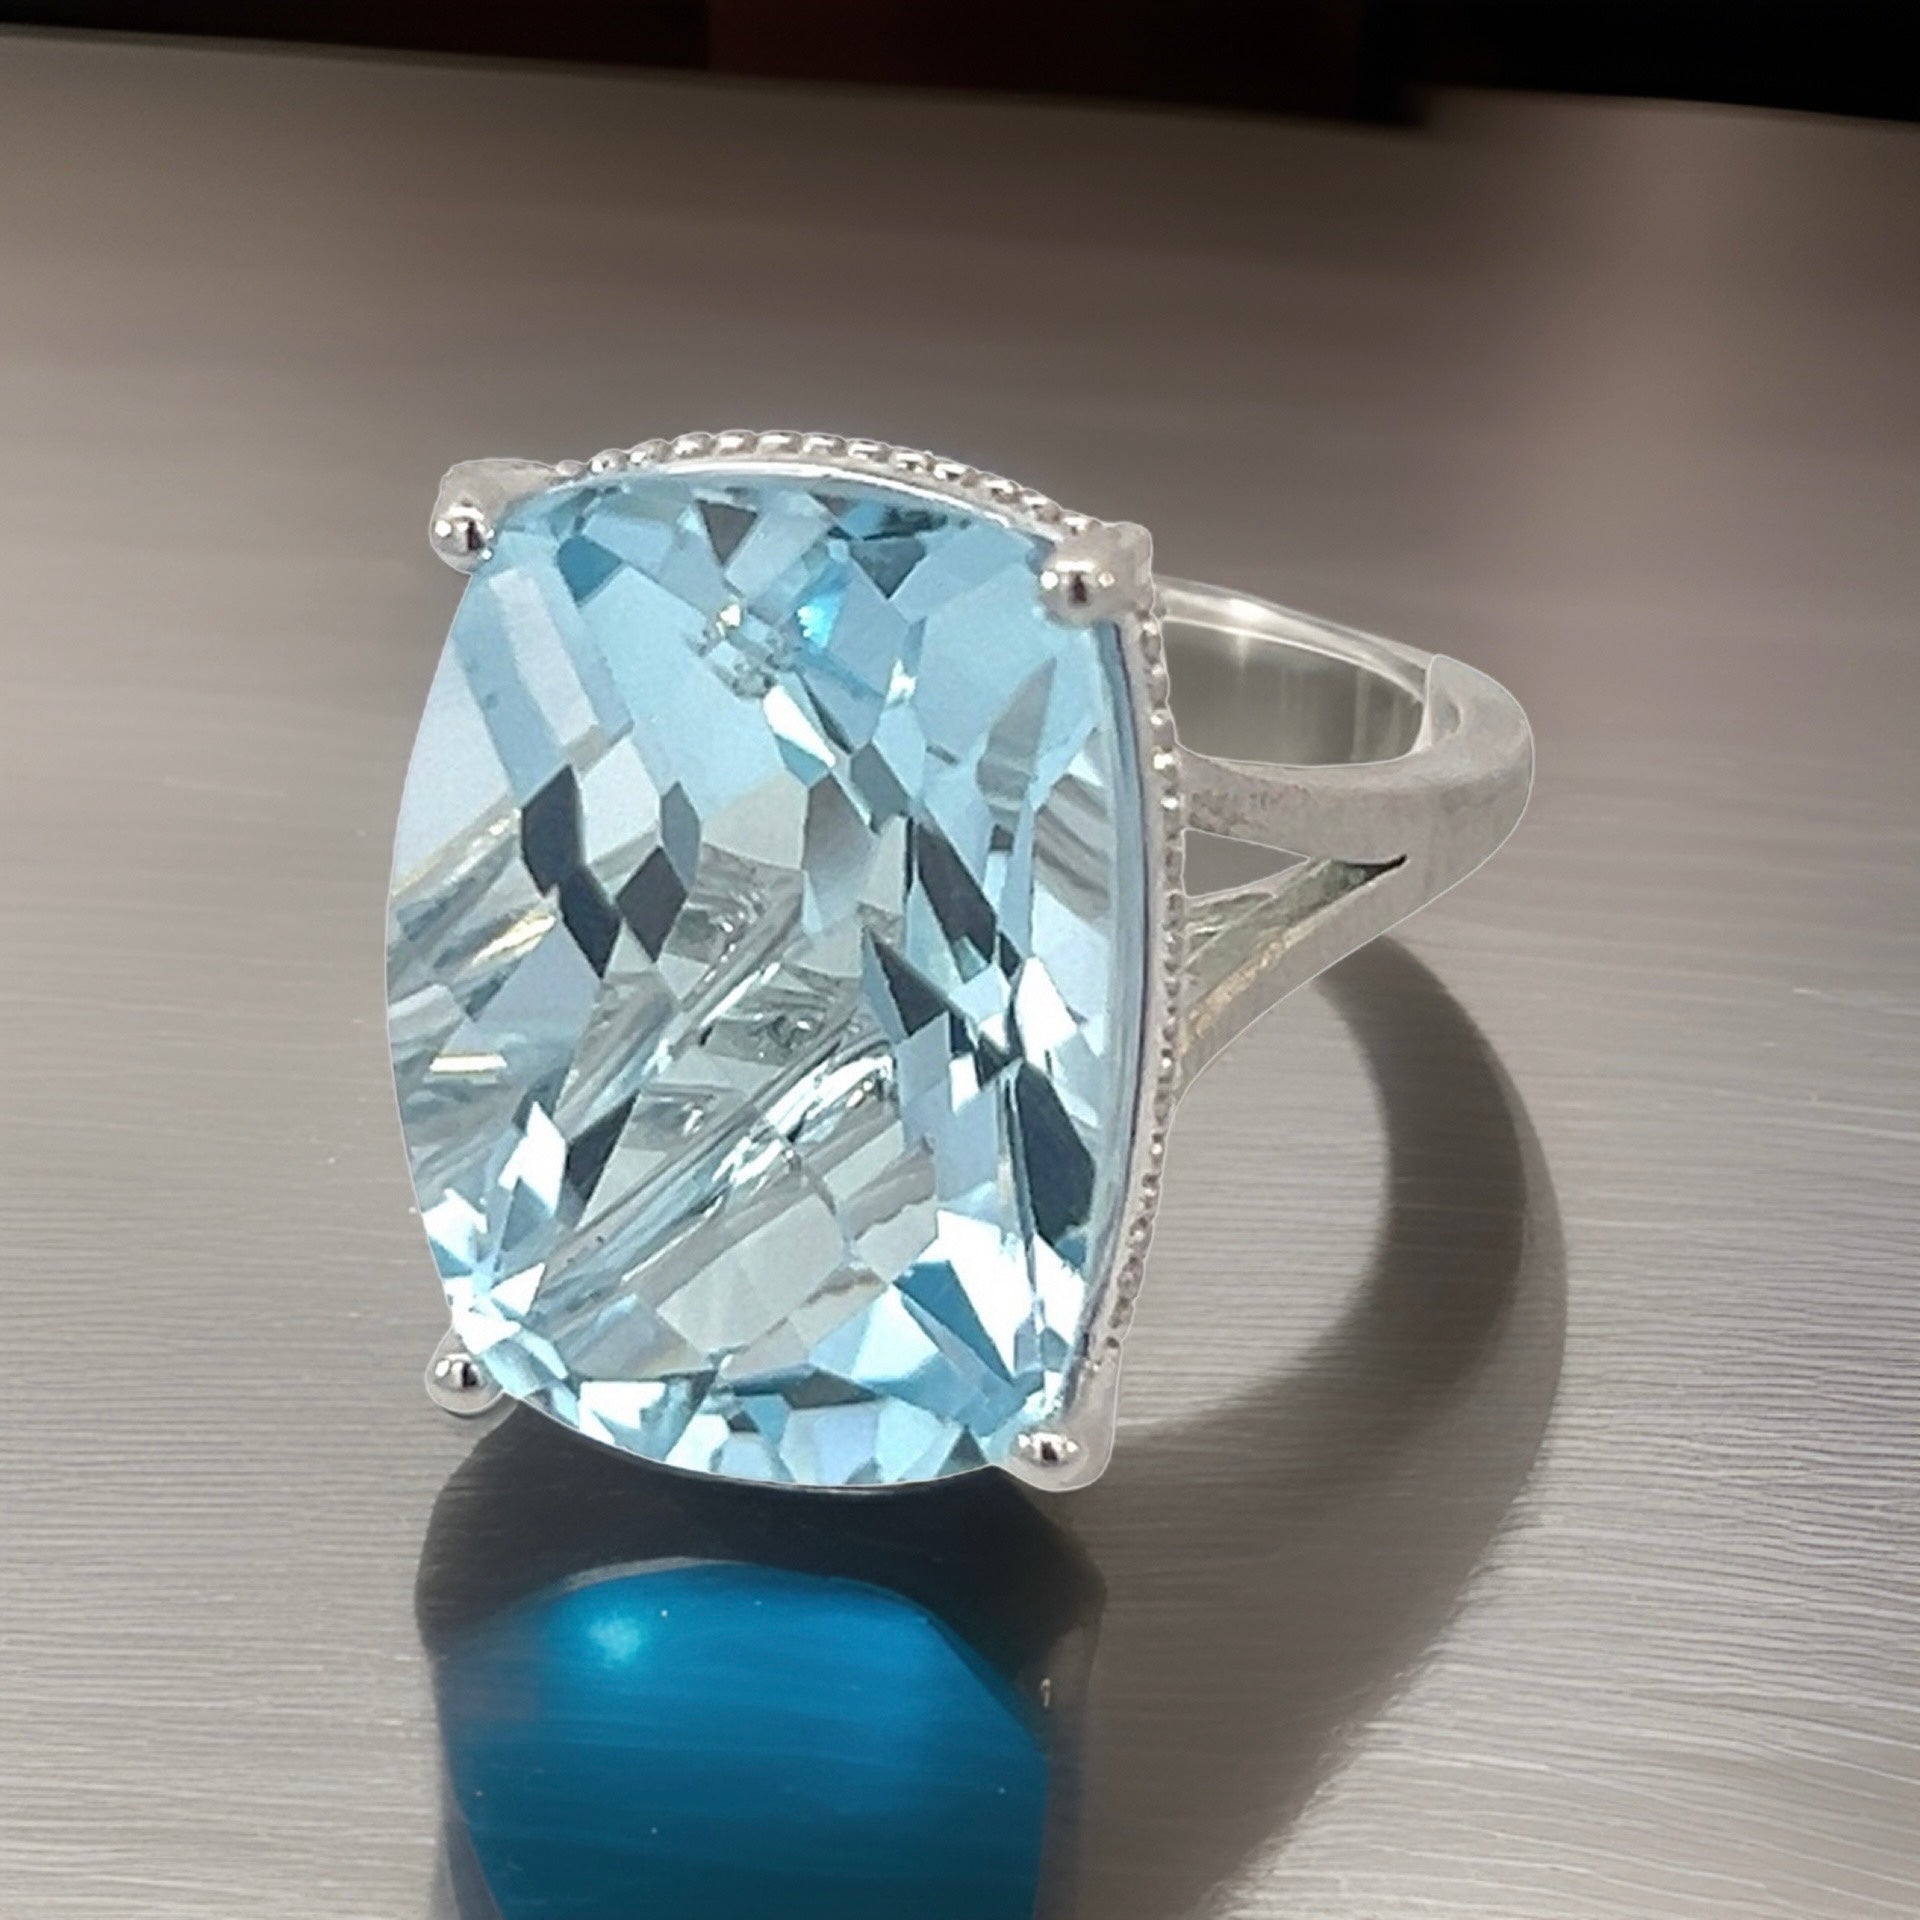 Natural Solitaire Blue Topaz Ring 6.5 14k W Gold 19.58 Cts Certified $3,950 310546